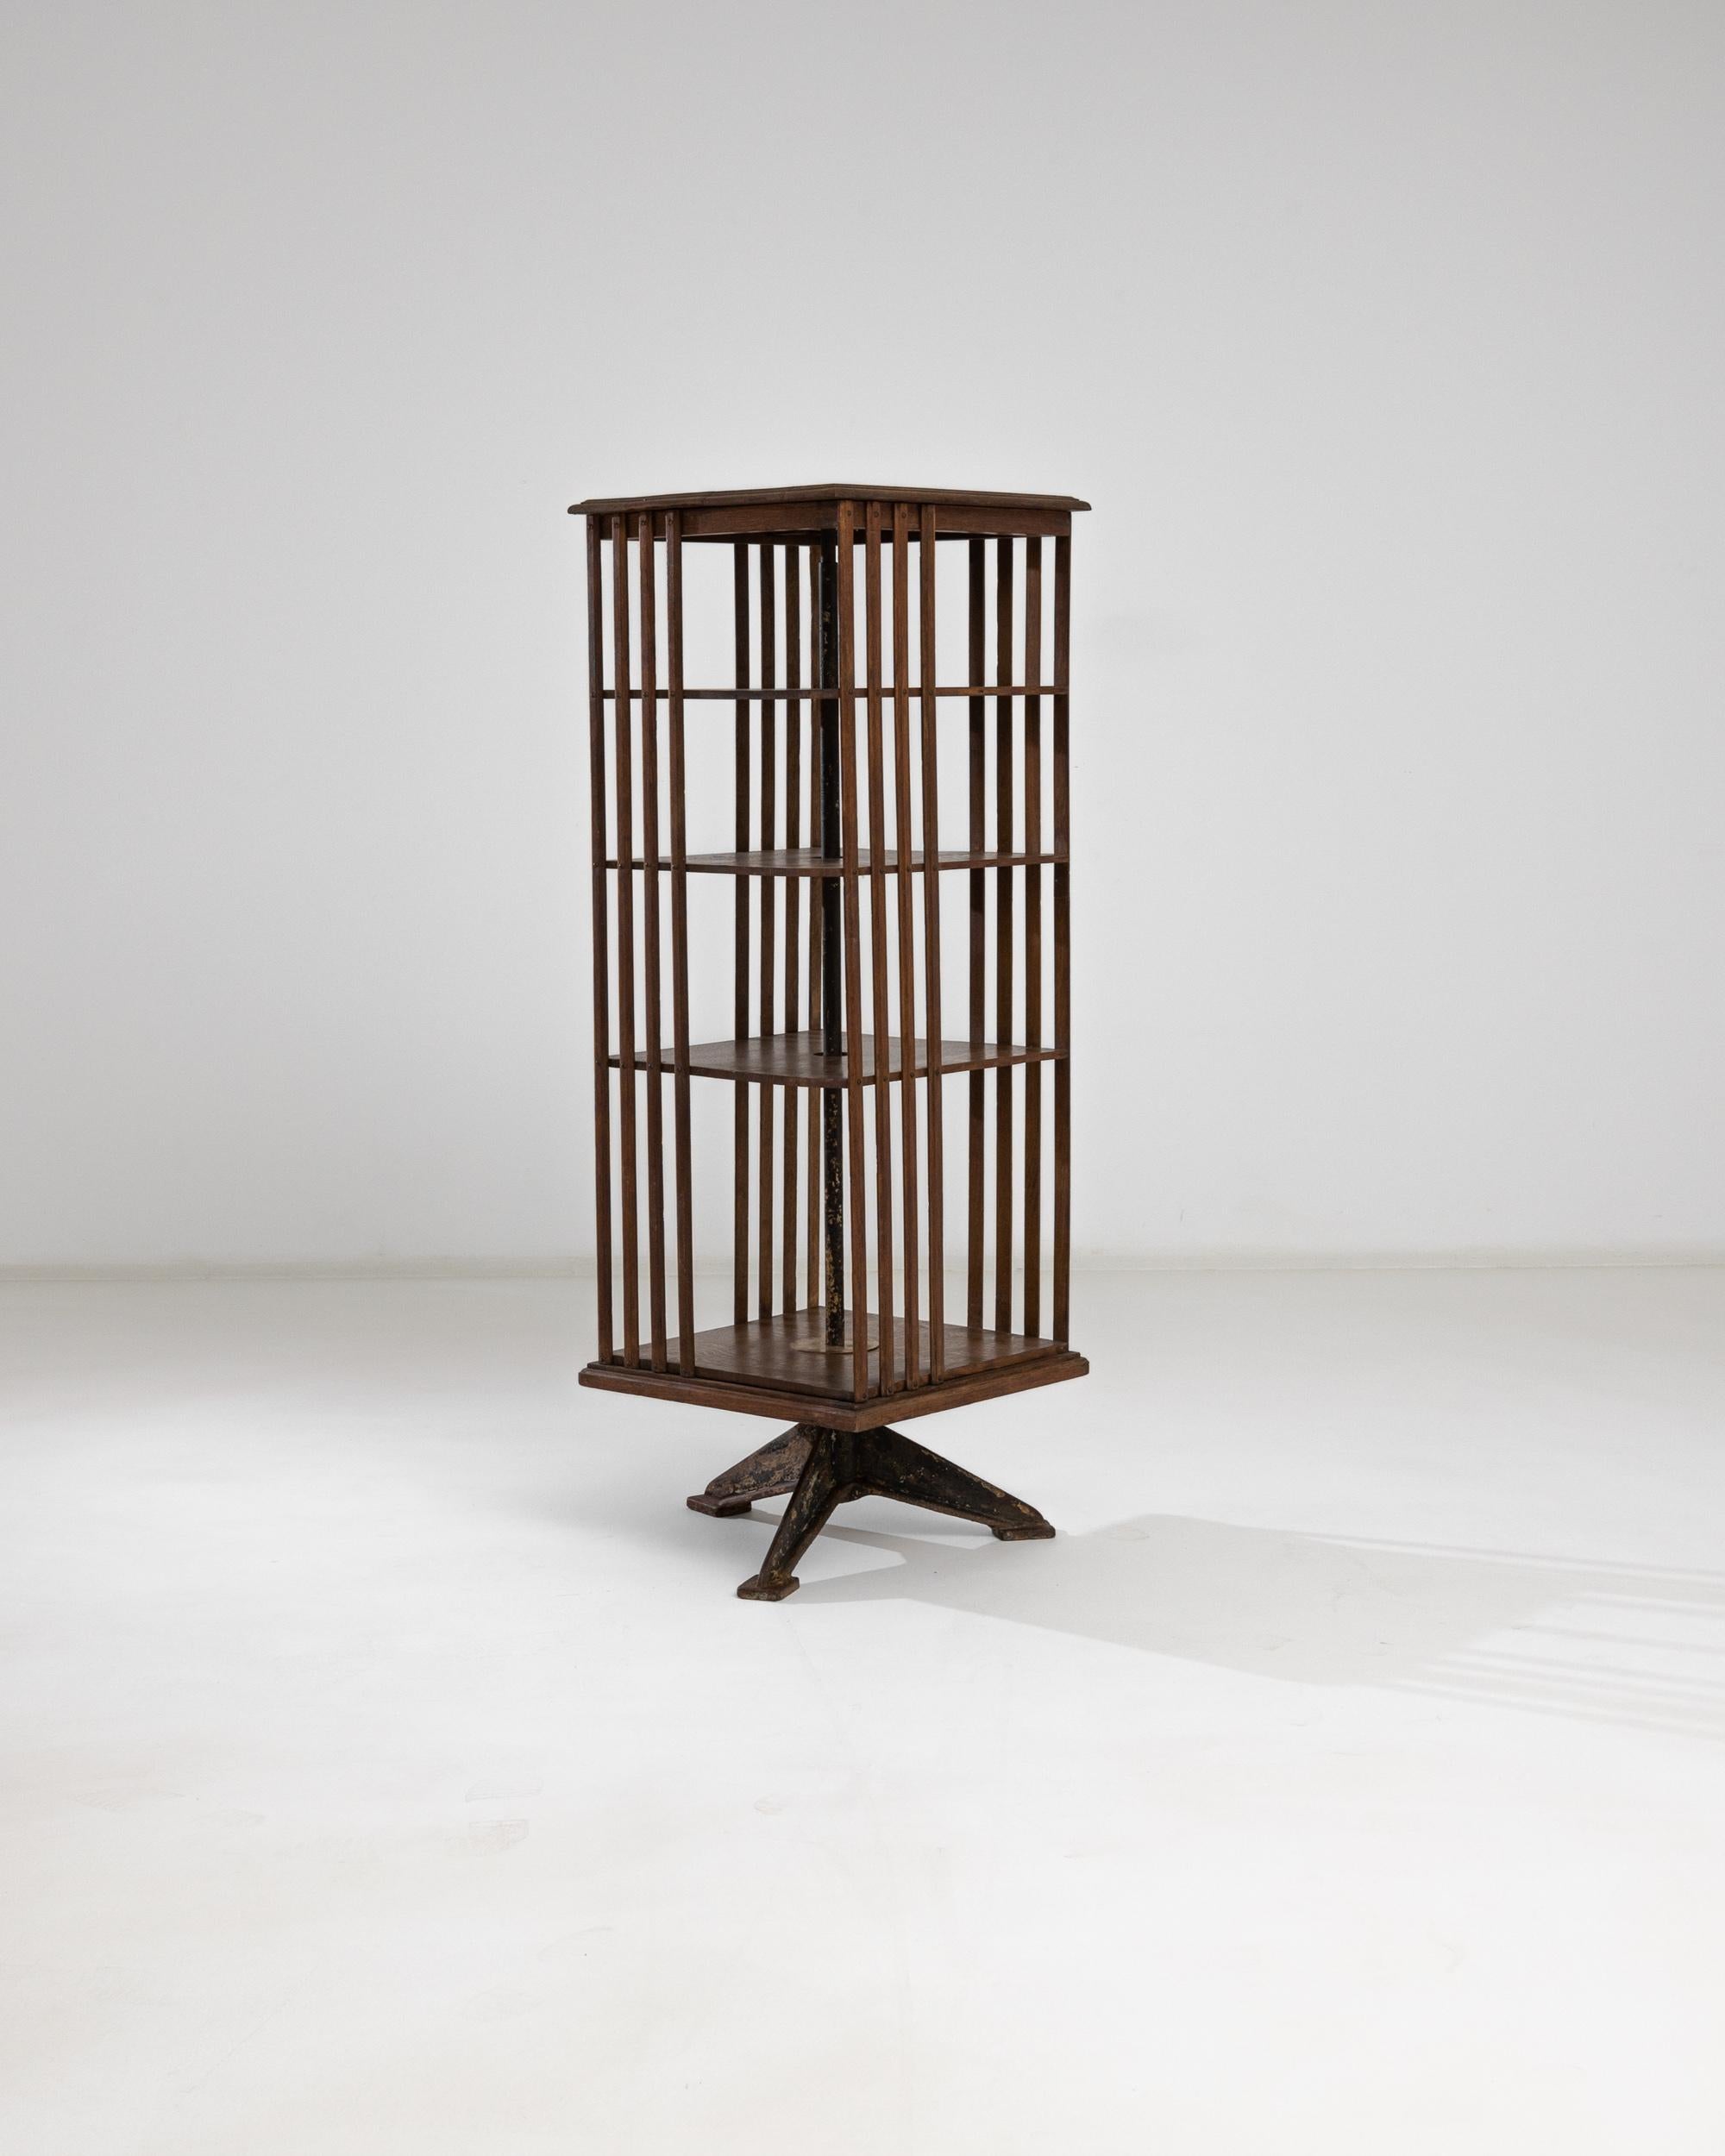 A wooden shelving unit from the United Kingdom, produced circa 1900. Standing on a patinated metal tripod stand, tall wooden rods elevate from an elegantly beveled square base. The nobly preserved wood exhibits a rich chocolate tone with tawny hues,